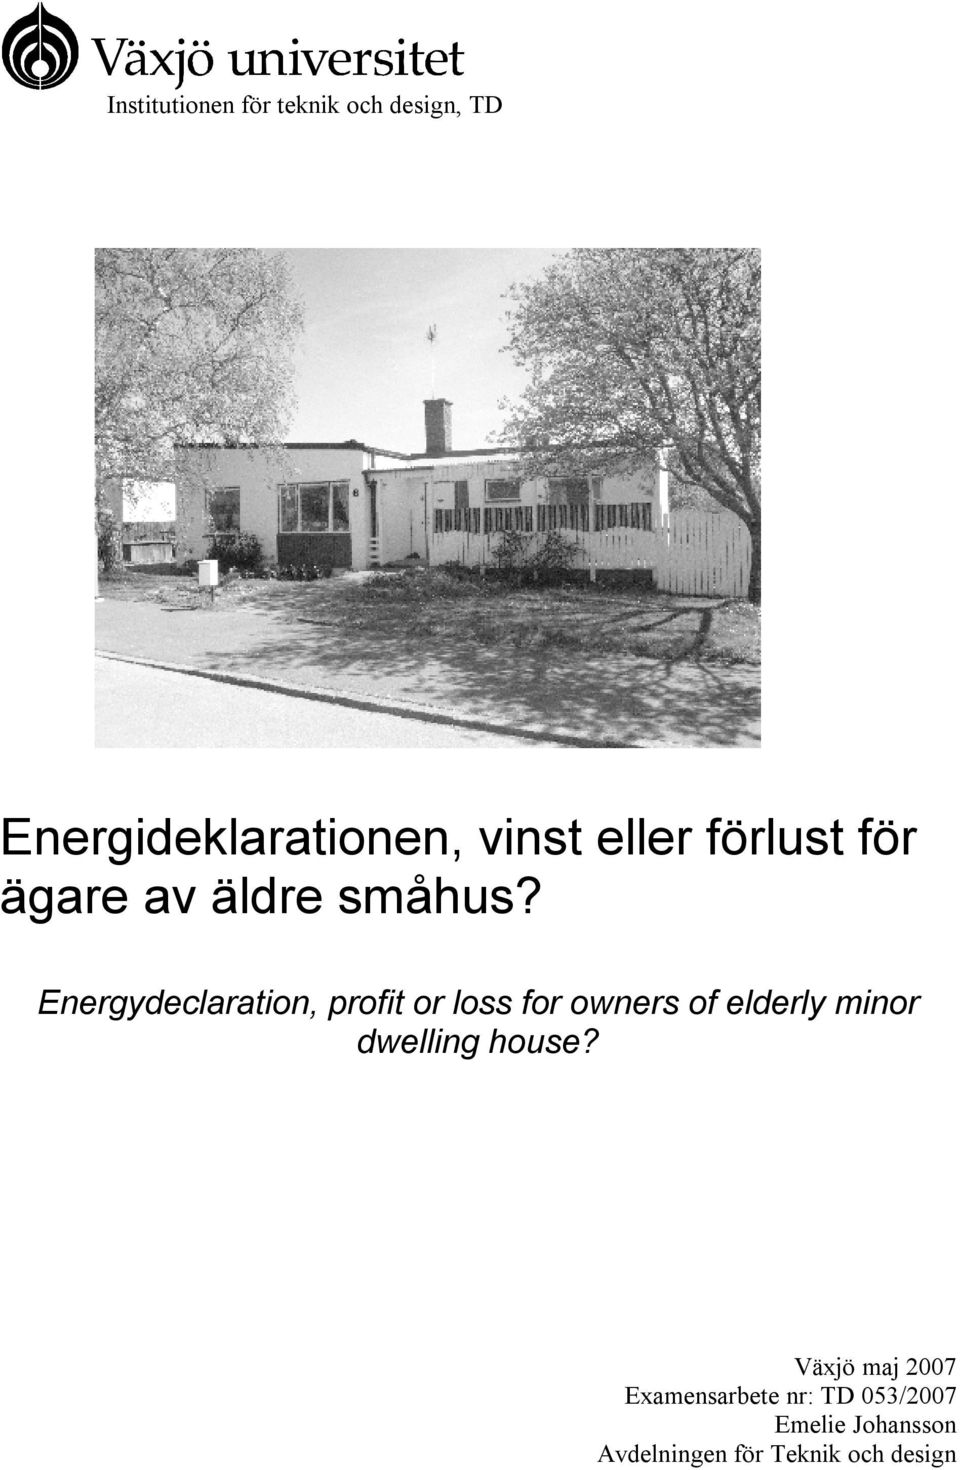 Energydeclaration, profit or loss for owners of elderly minor dwelling